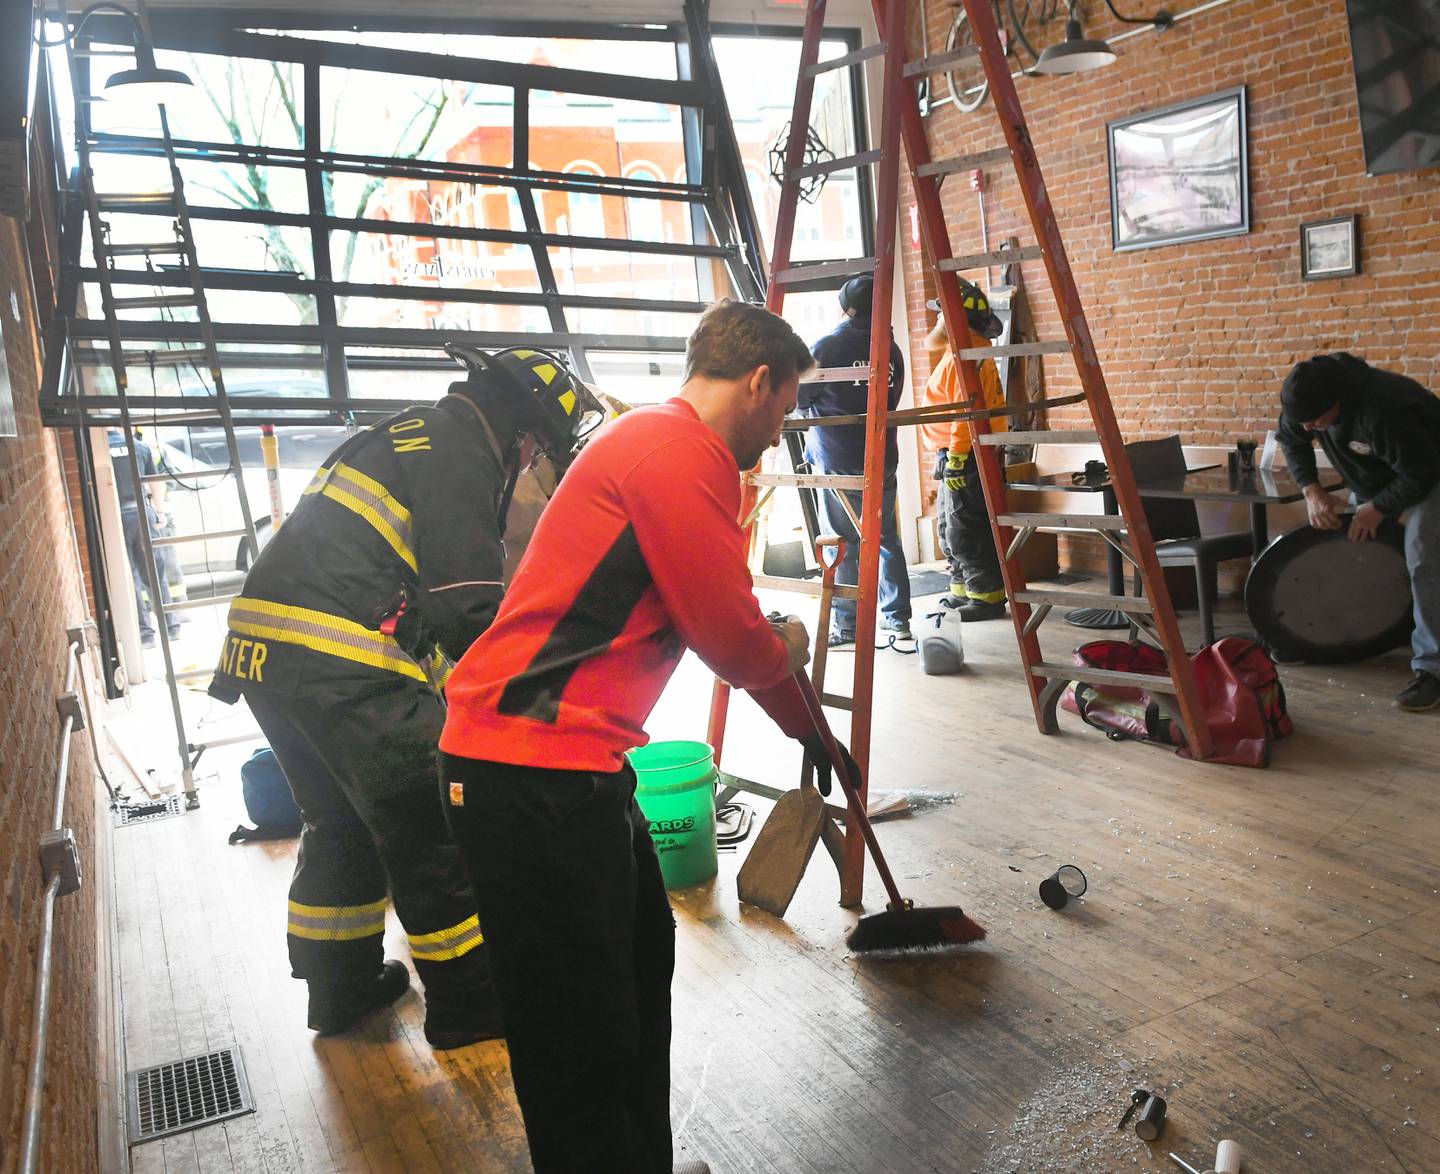 Dan Gale of Oregon and a firefighter with broken glass after a car crashed into the Ogle County Brewery in downtown Oregon after being hit by another vehicle at the intersection of Illinois 64 and Illinois 2. cleaning. Dan's father, Mark, he is one of the building's owners.